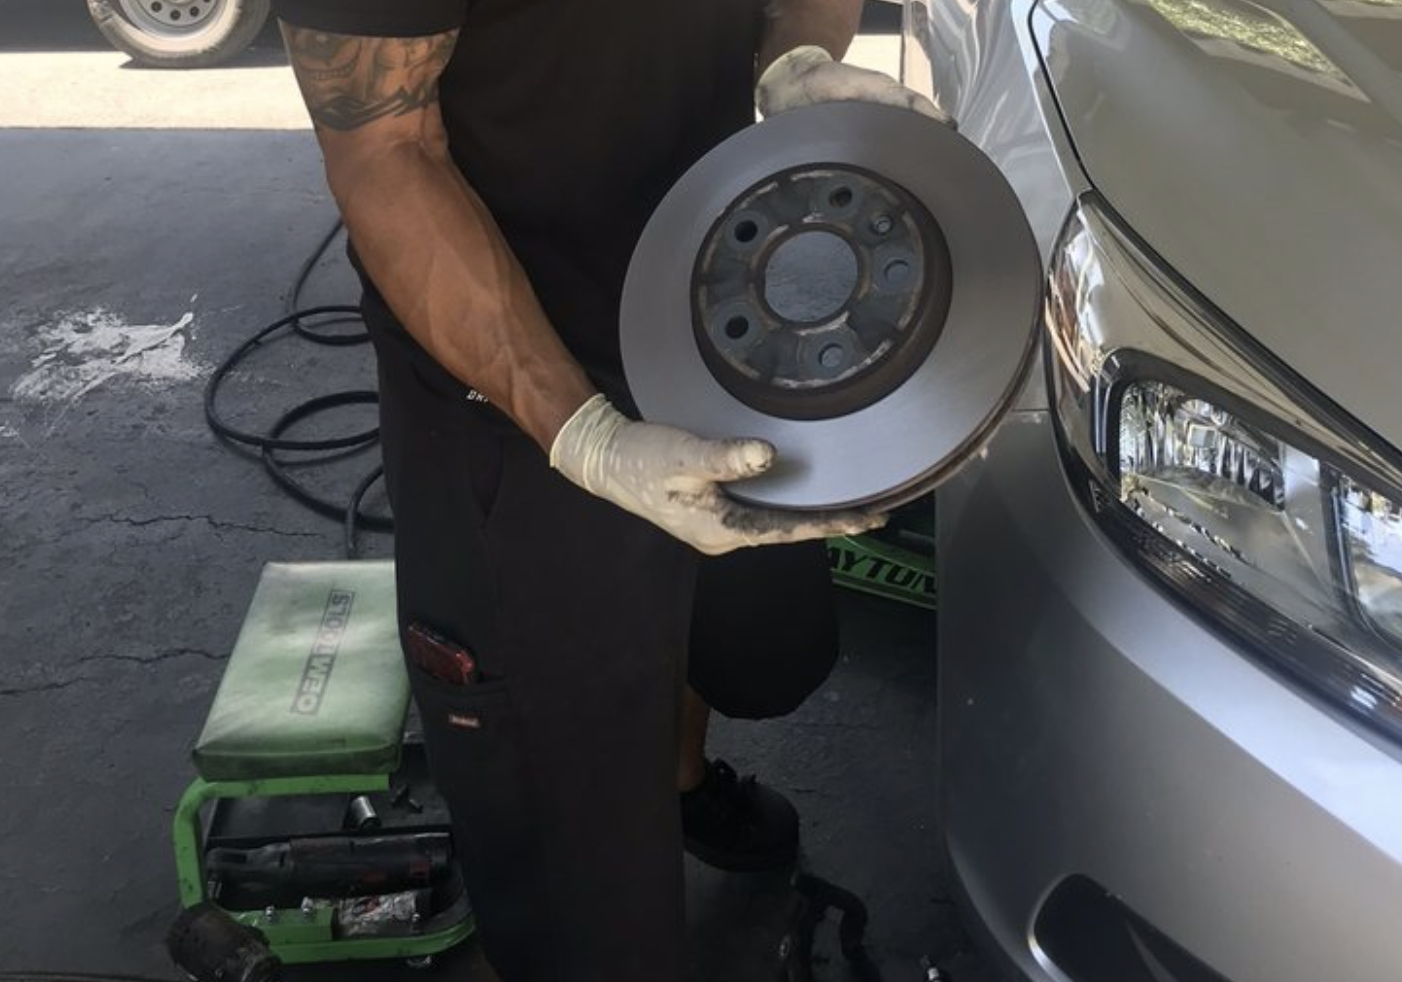 this image shows mobile mechanic services in Elk Grove, California